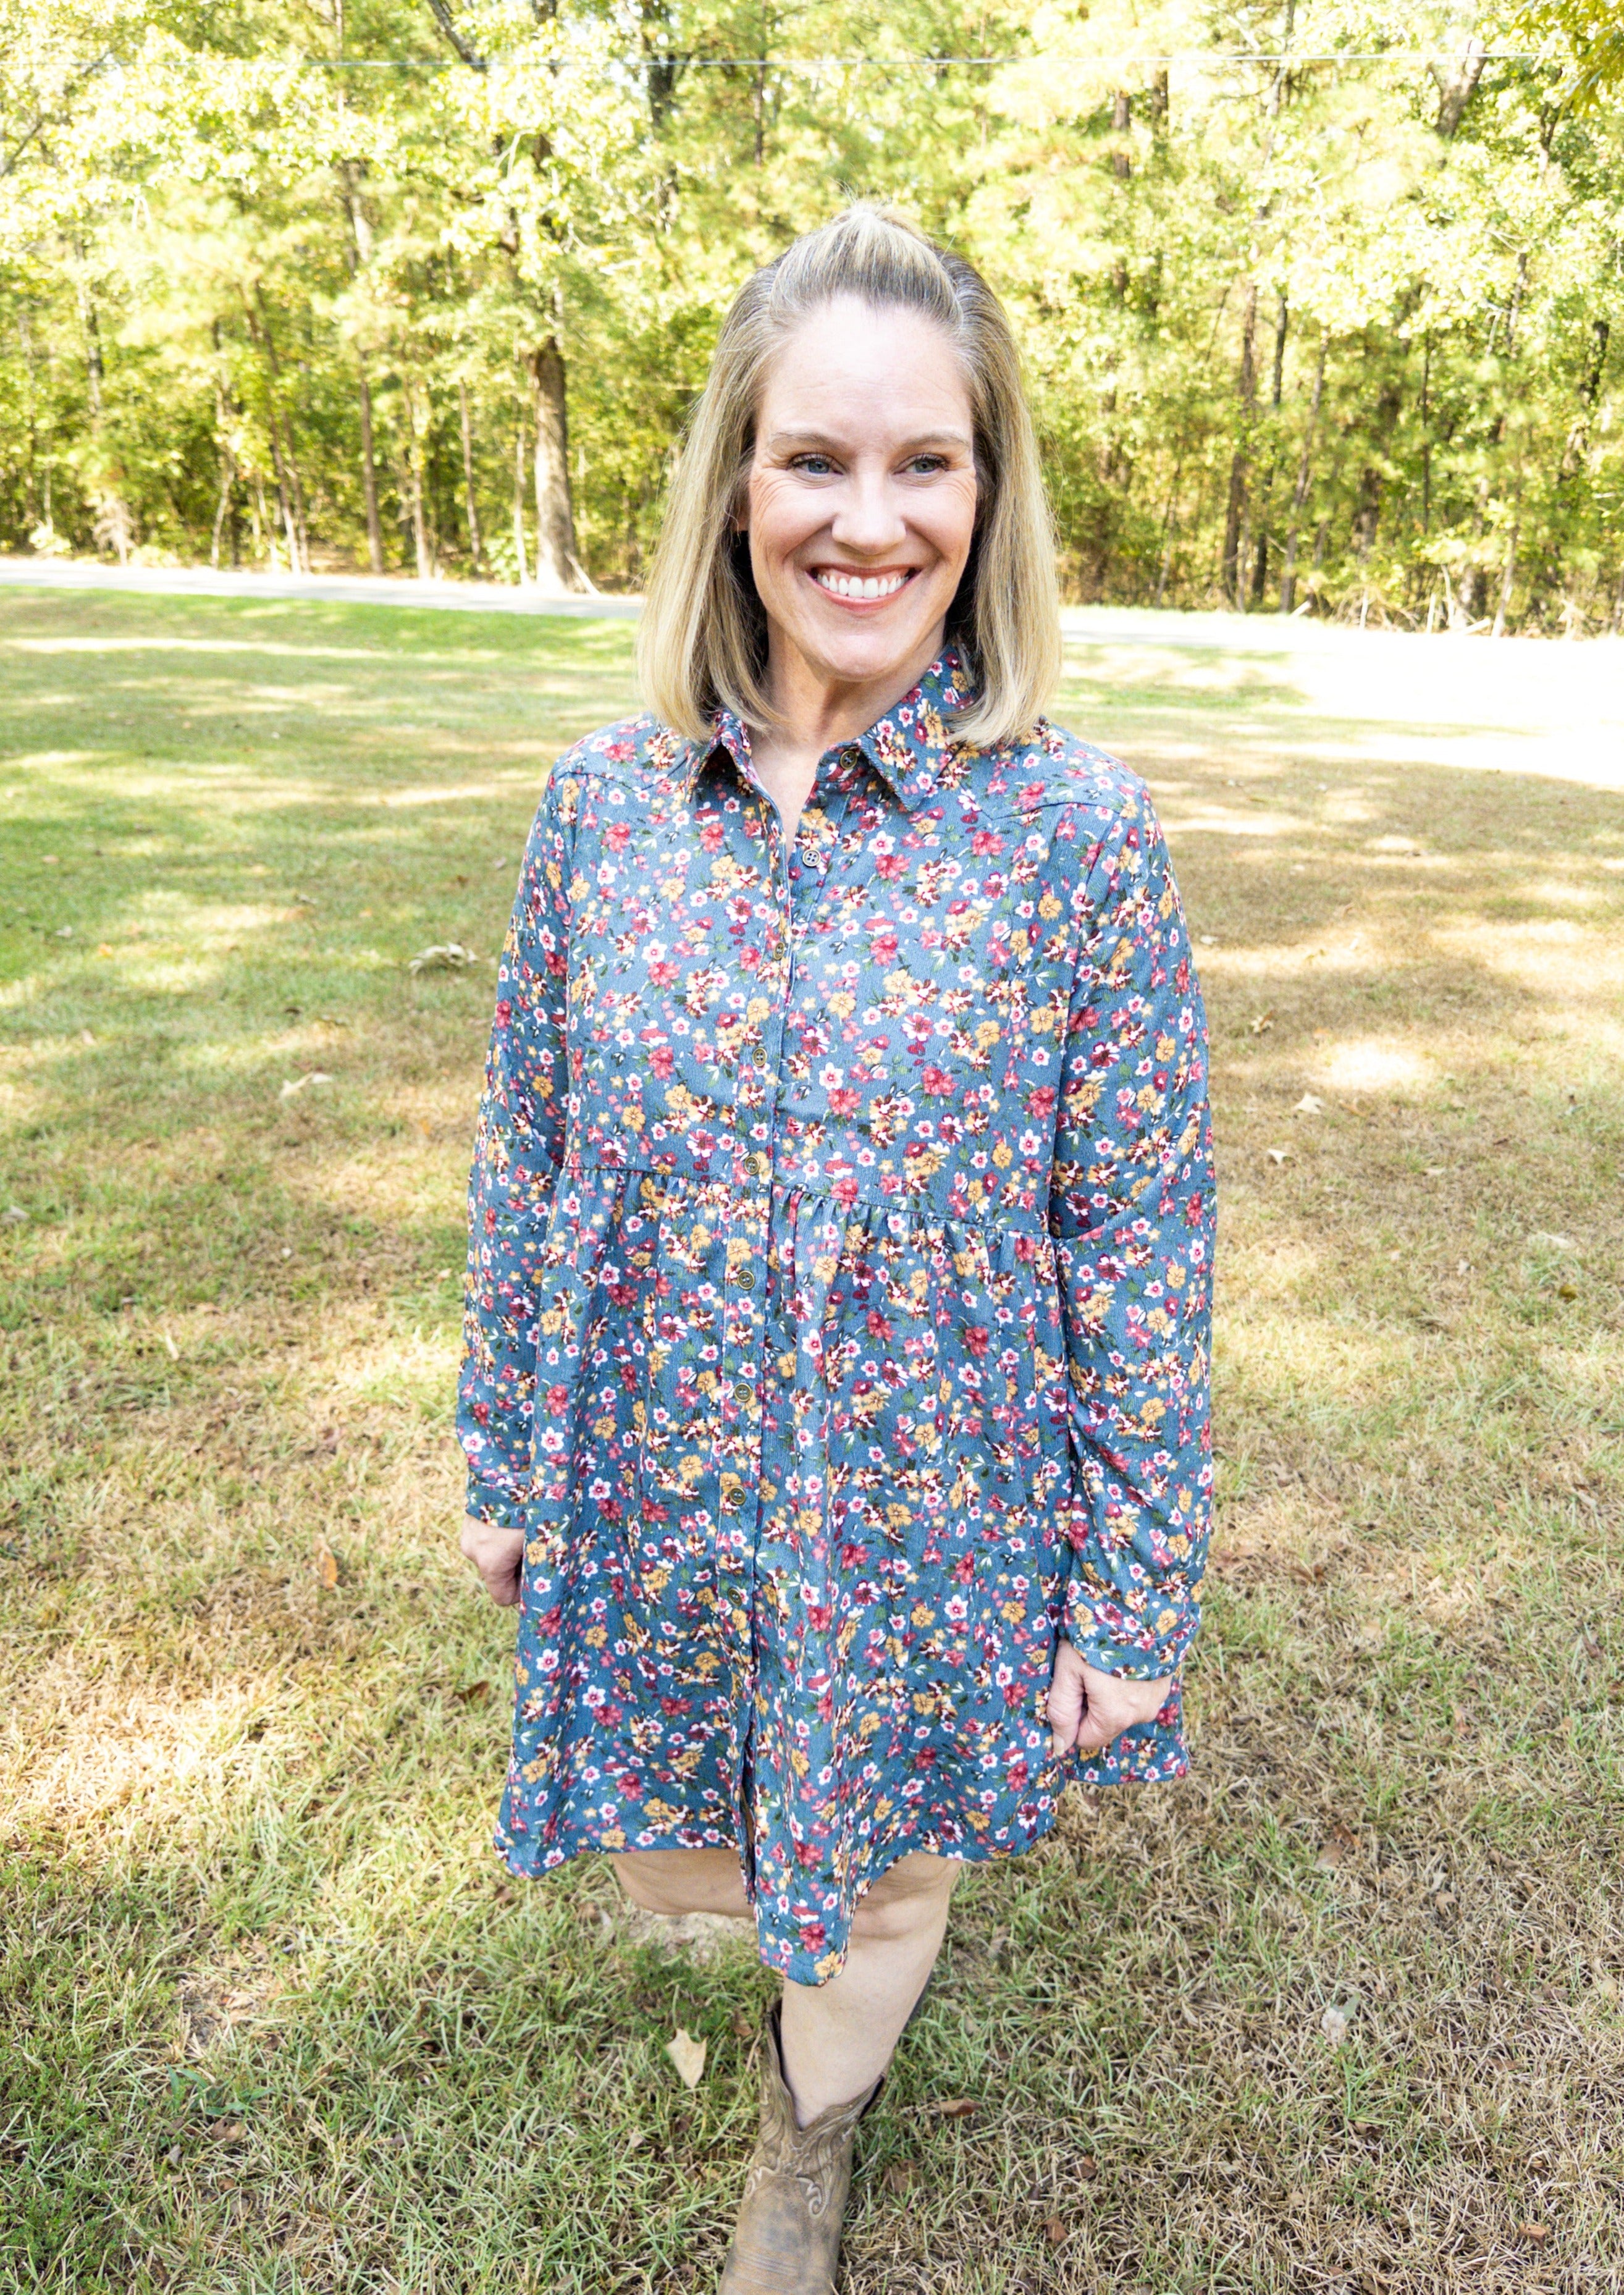 Dusty blue corduroy dress with long sleeves and a soft colored floral pattern all over. The dress has buttons all down the front and a collar.